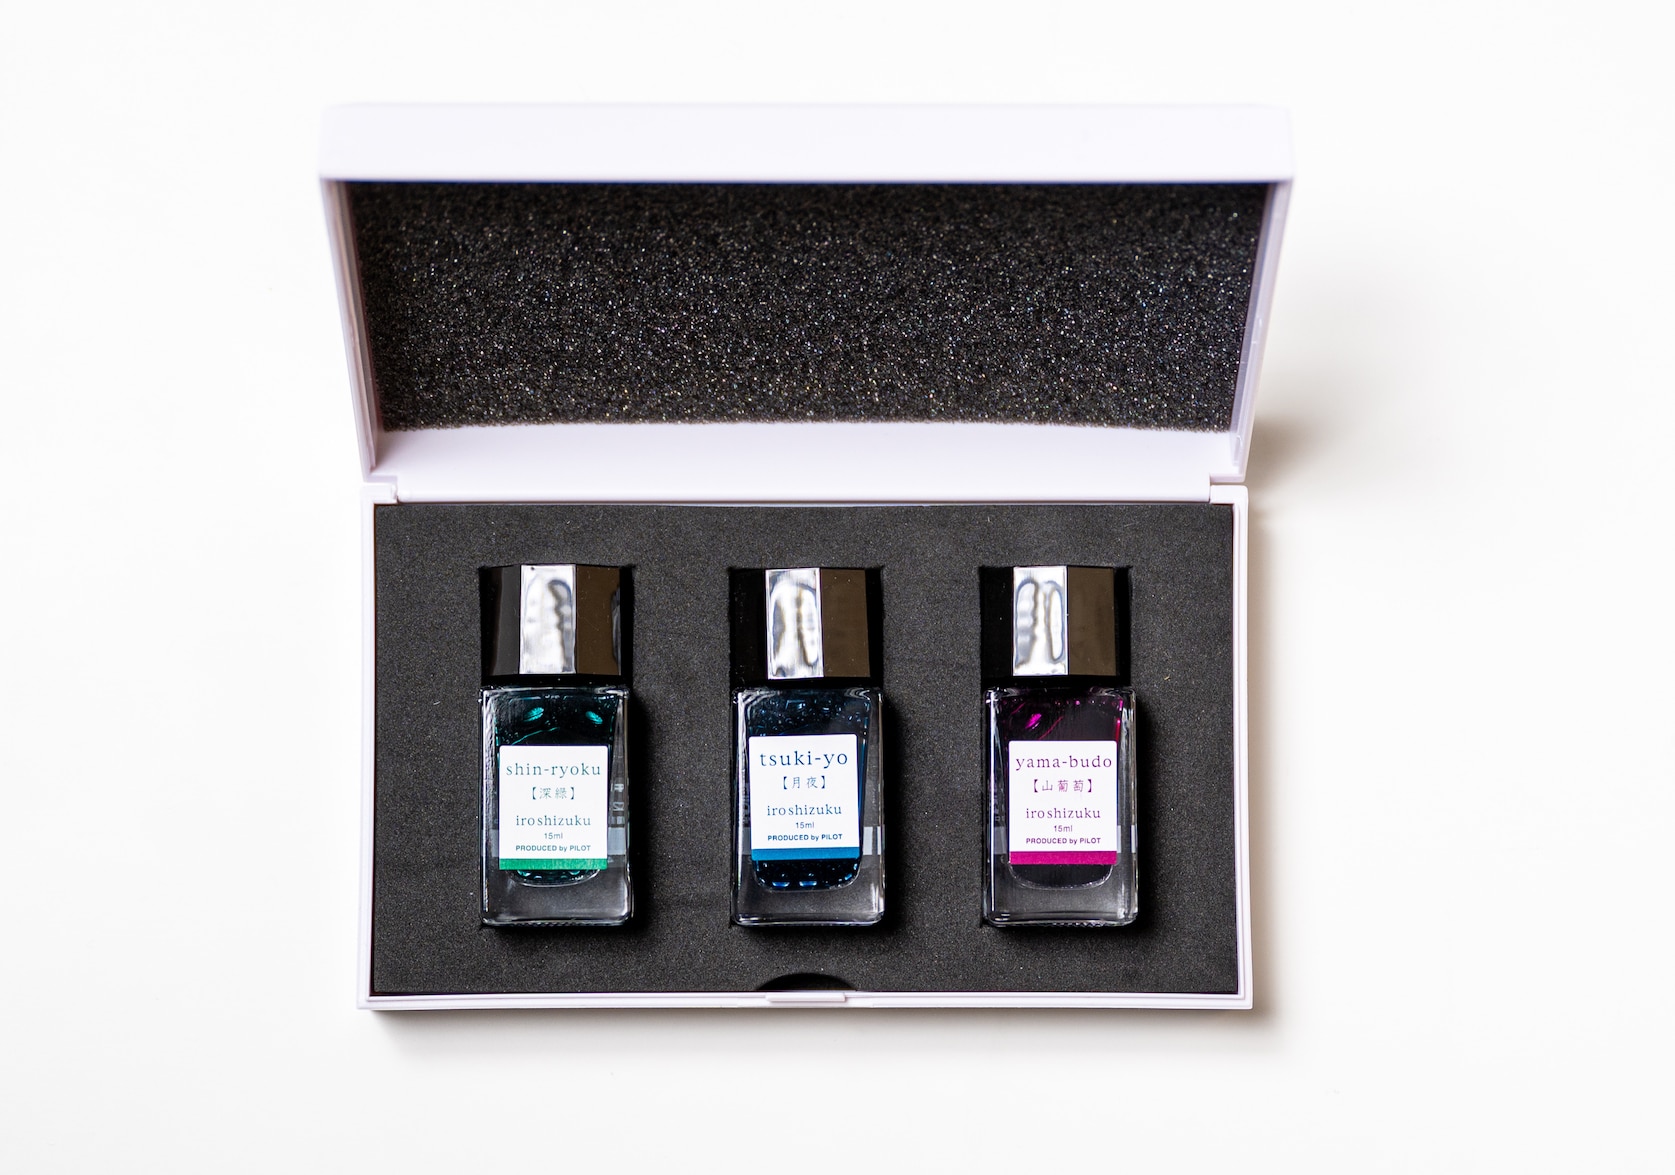 Three vials of ink displayed in a small box. Text on each bottle reads: shin-ryoku, tsuki-yo, yama-budo. iroshizuku. 15 ml. Produced by Pilot. Each bottle's label features the colour of the ink: green, blue, burgundy.